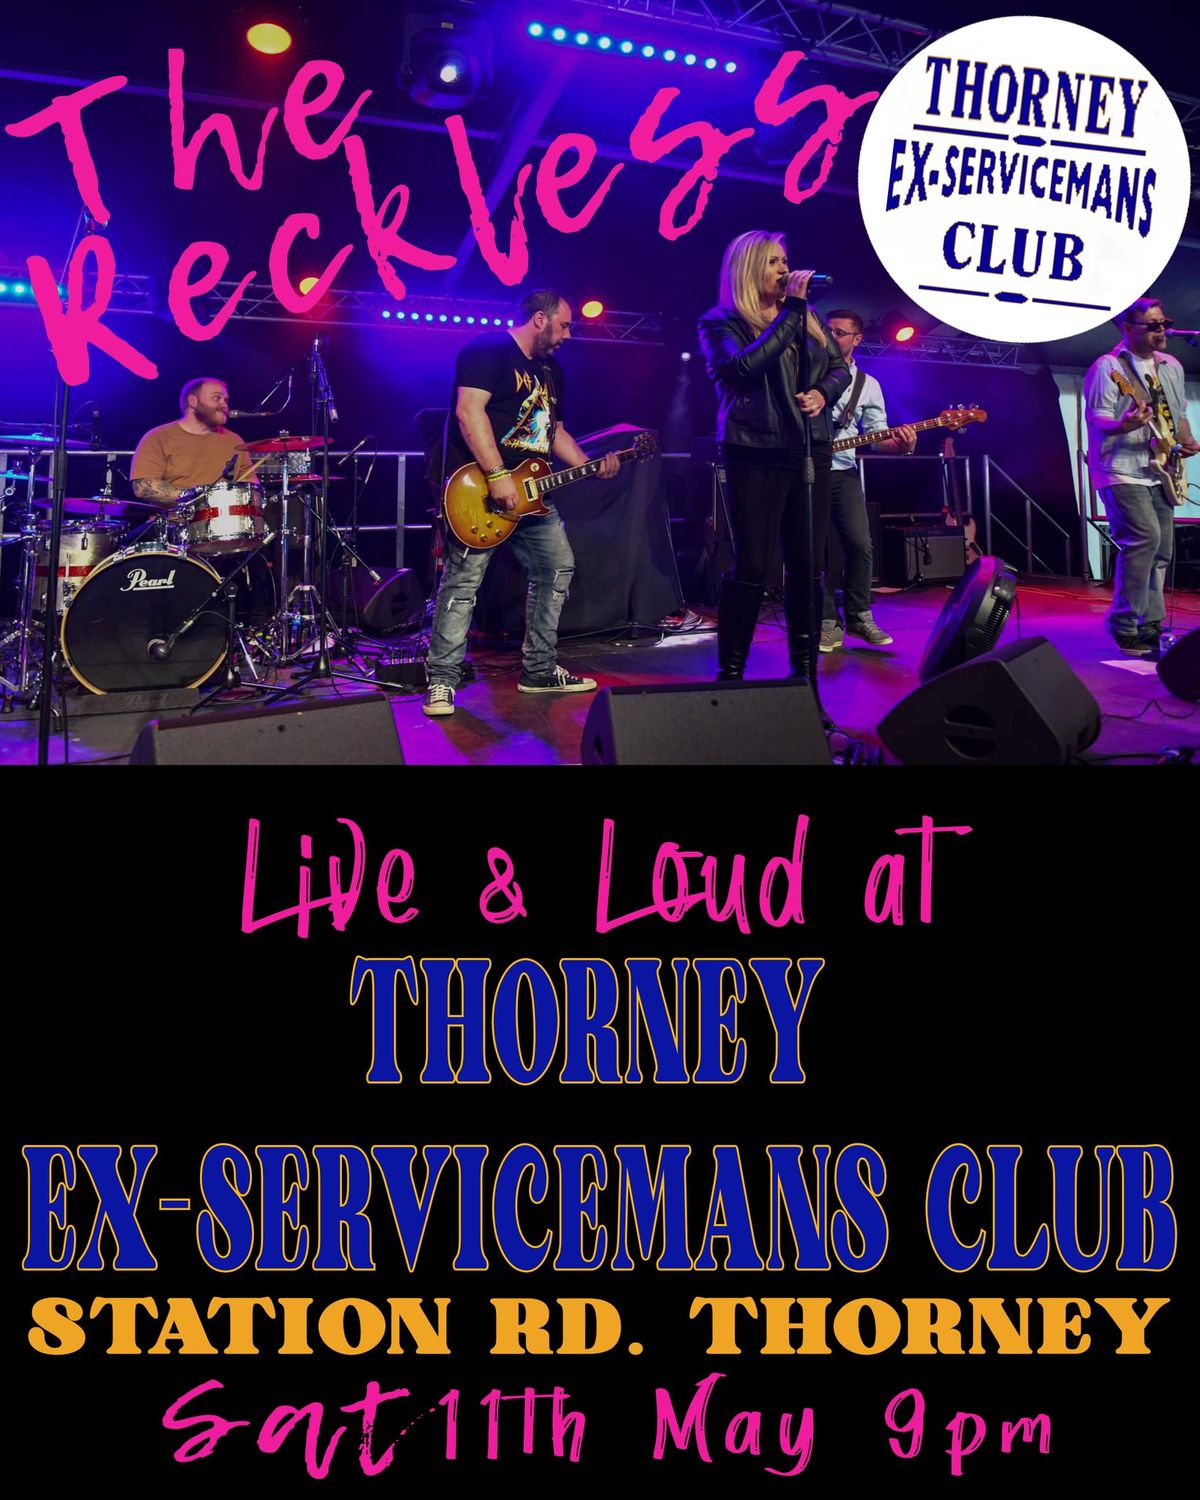 The Reckless Live @ Thorney Ex Servicemen's Club 